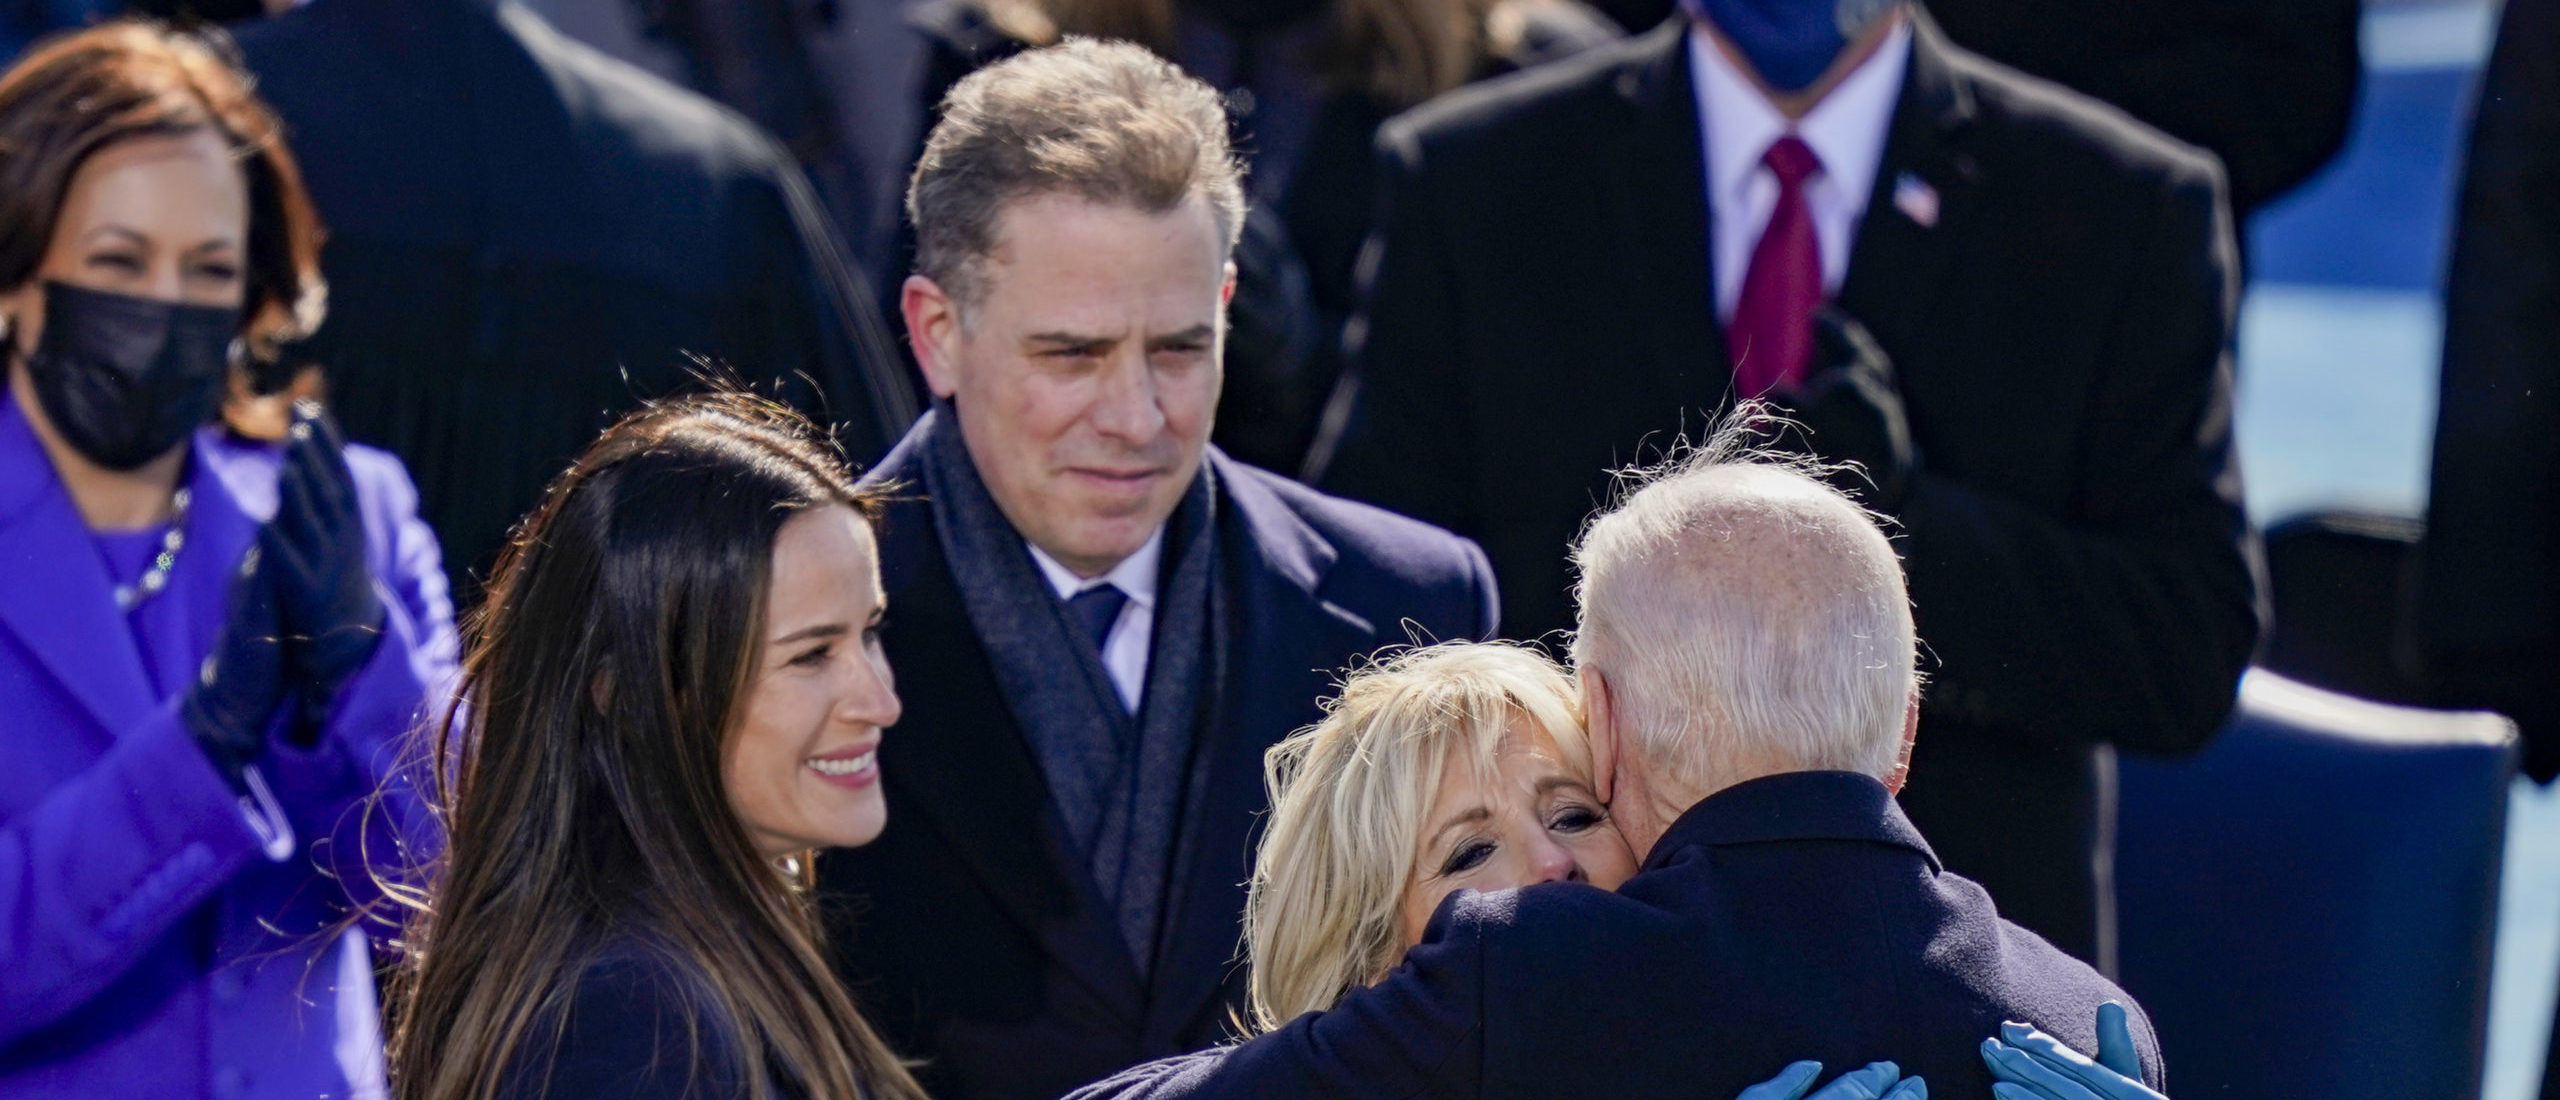 WASHINGTON, DC - JANUARY 20: U.S. President Joe Biden embraces his family First Lady Dr. Jill Biden, son Hunter Biden and daughter Ashley after being sworn in during his inauguation on the West Front of the U.S. Capitol on January 20, 2021 in Washington, DC. During today's inauguration ceremony Joe Biden becomes the 46th president of the United States. (Photo by Drew Angerer/Getty Images)